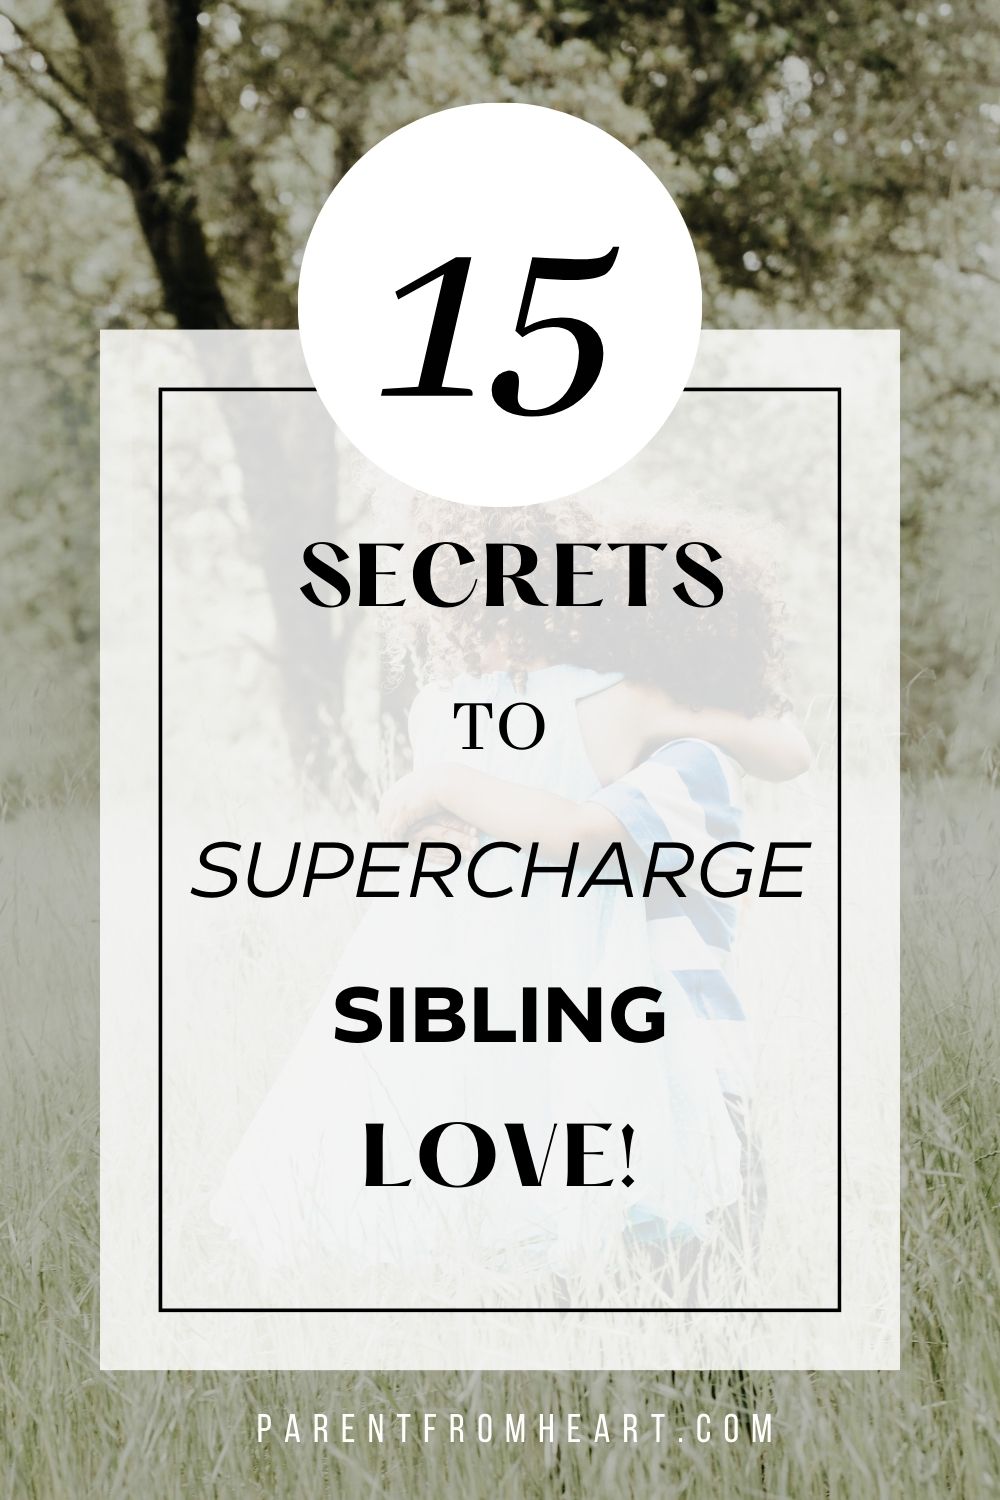 15 Secrets to Sibling Love Cover Photo with two siblings hugging in the background.